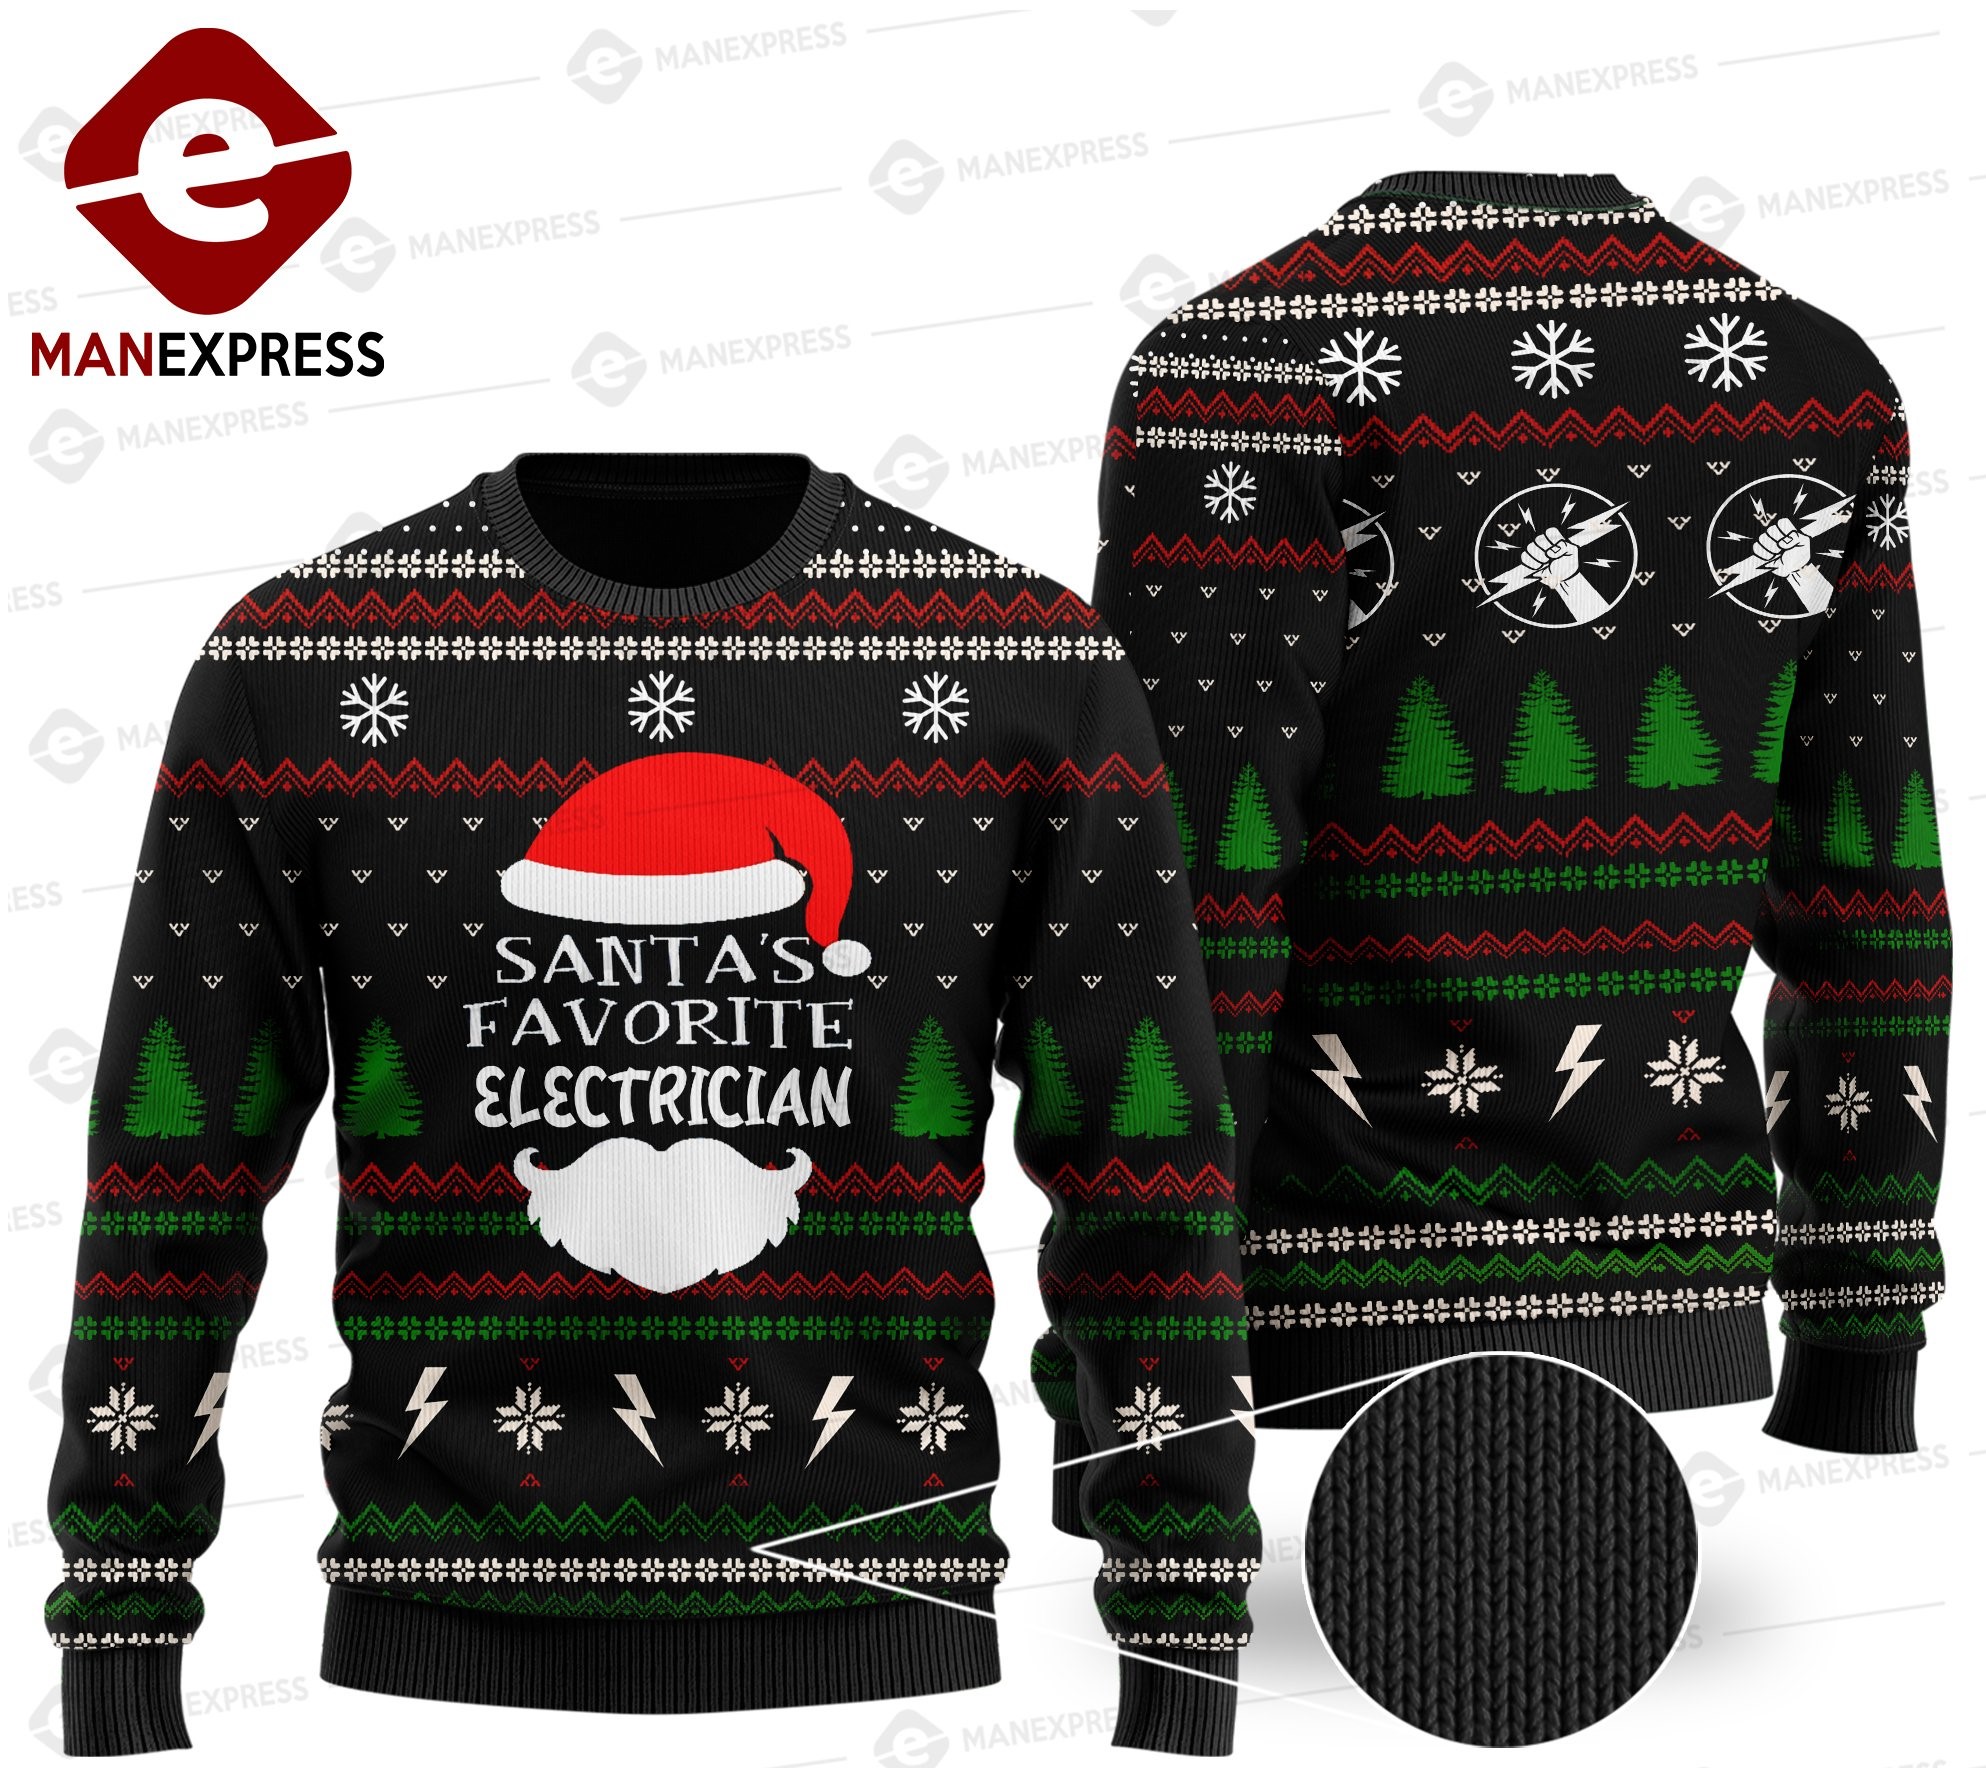 santas favorite electrician all over print ugly christmas sweater 2 - Copy (2)